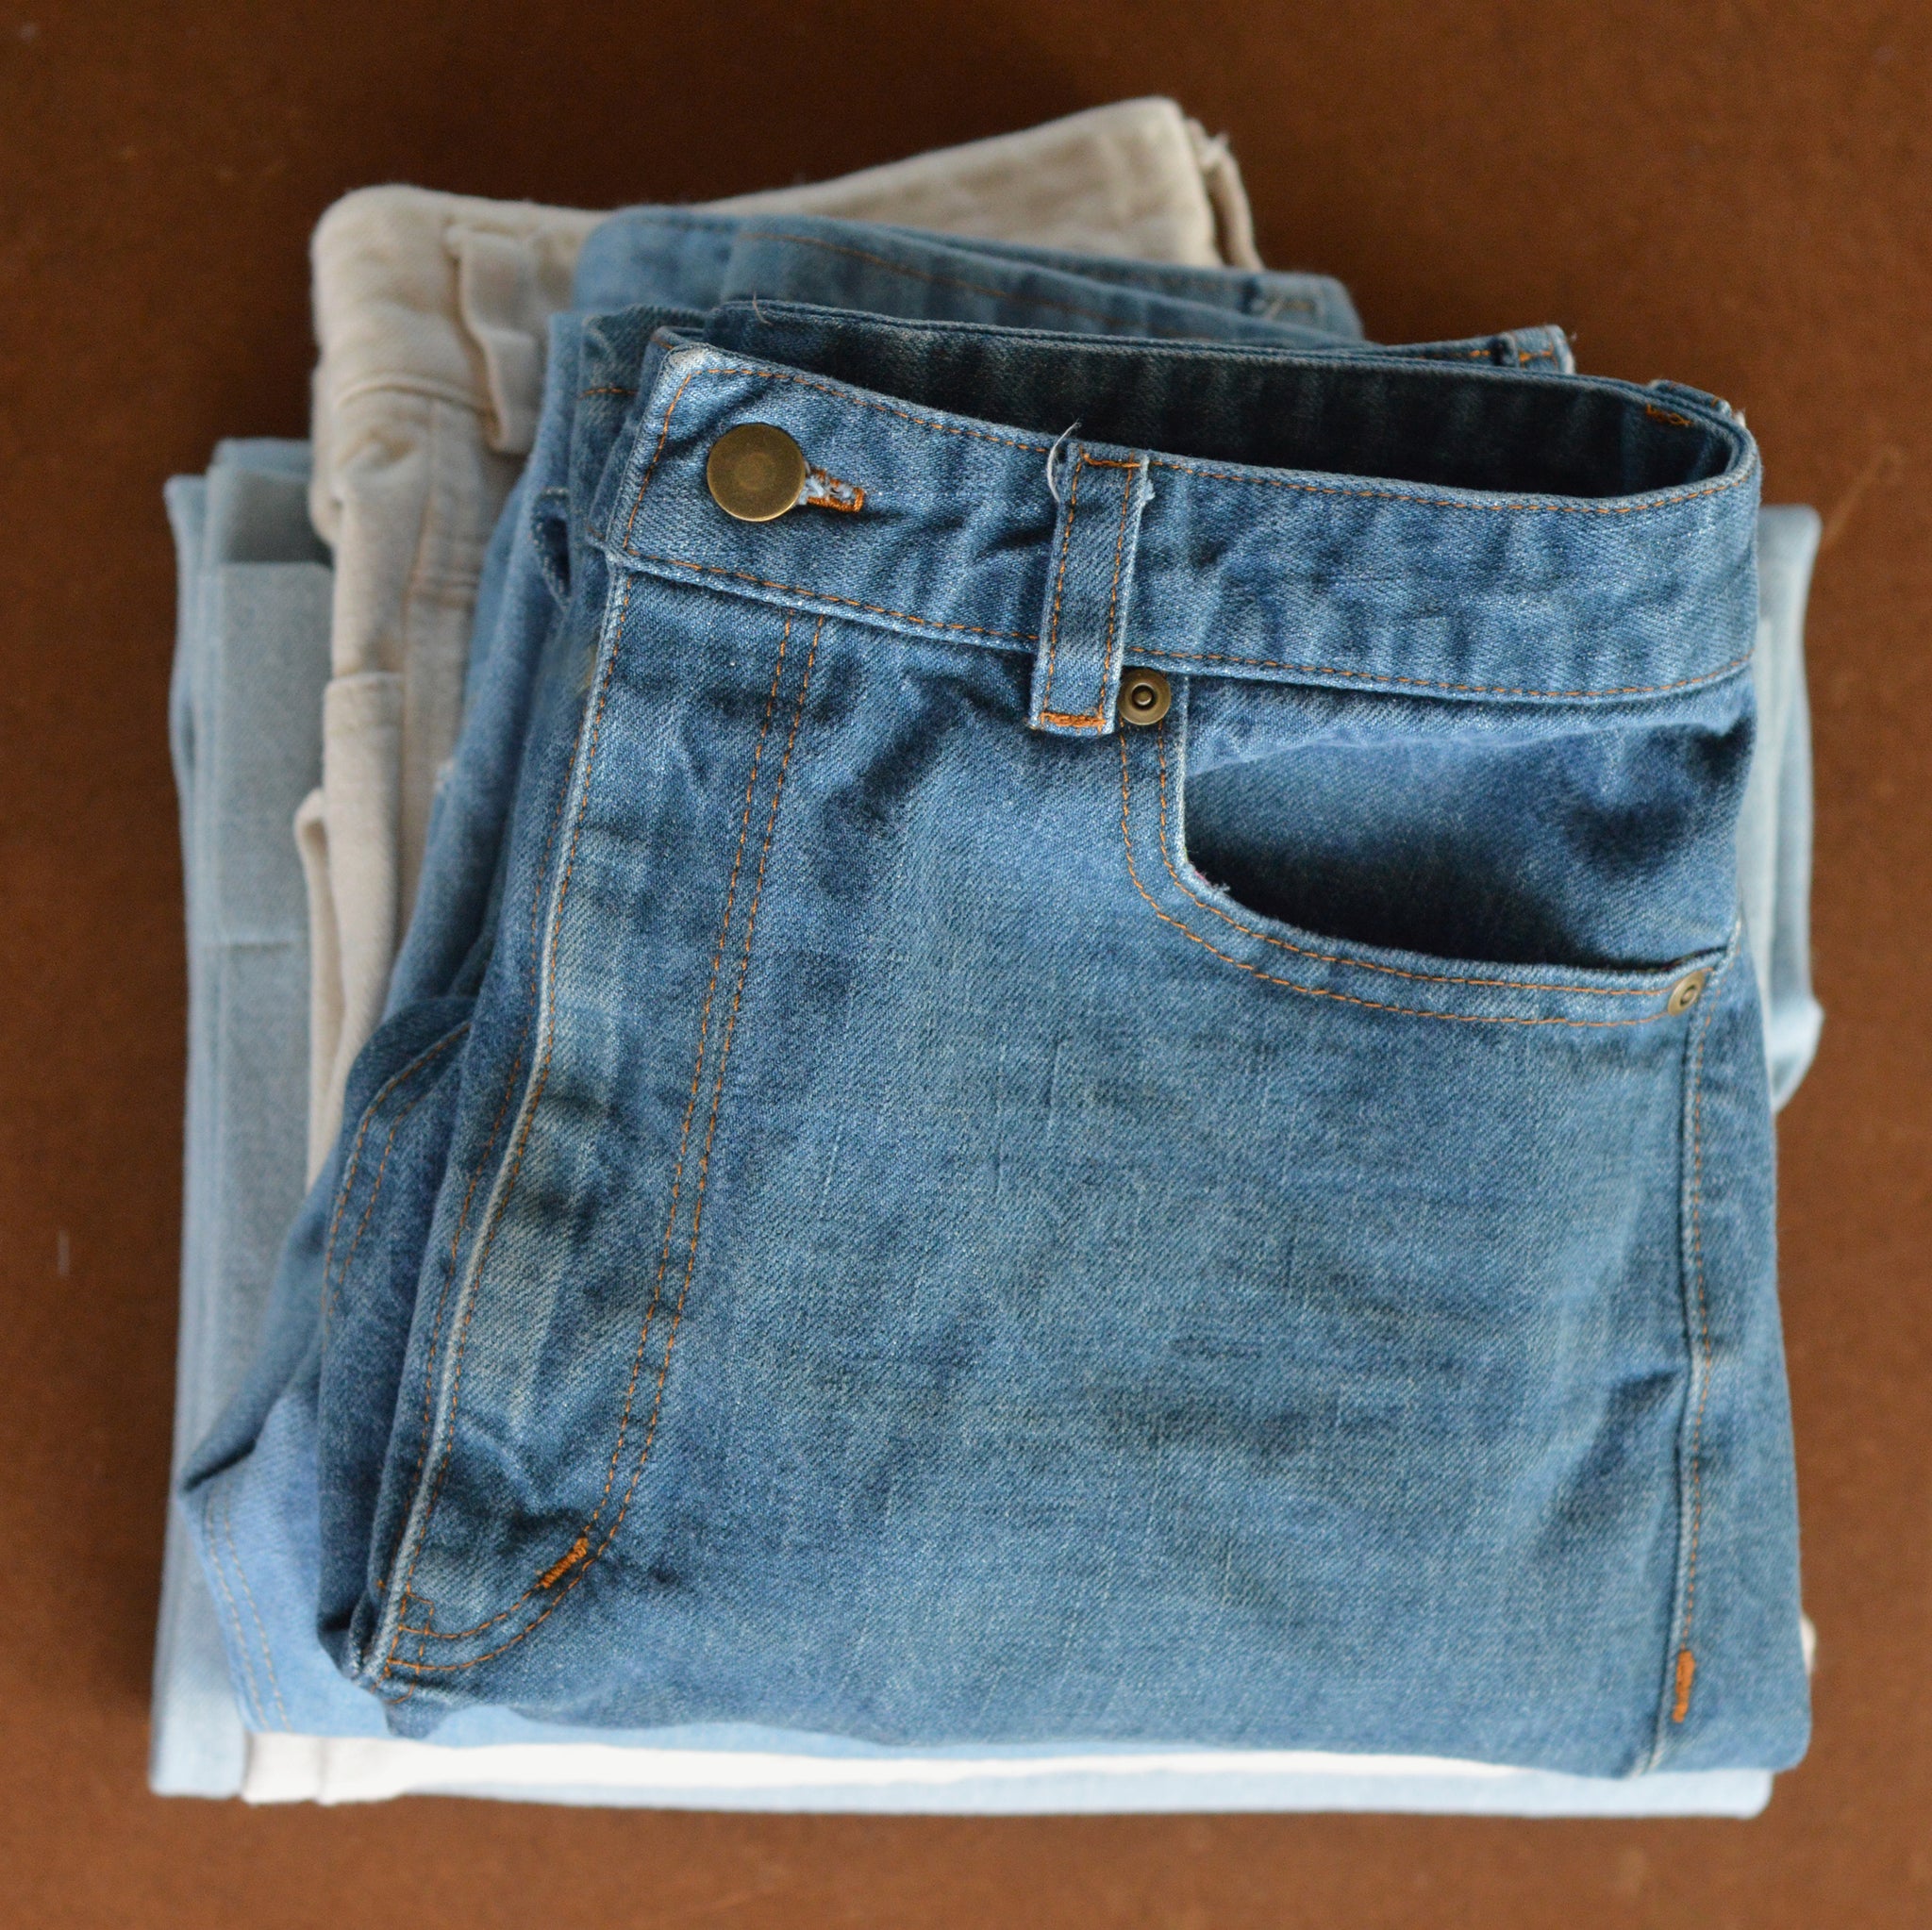 Garment Sewing - Make Your Own Jeans